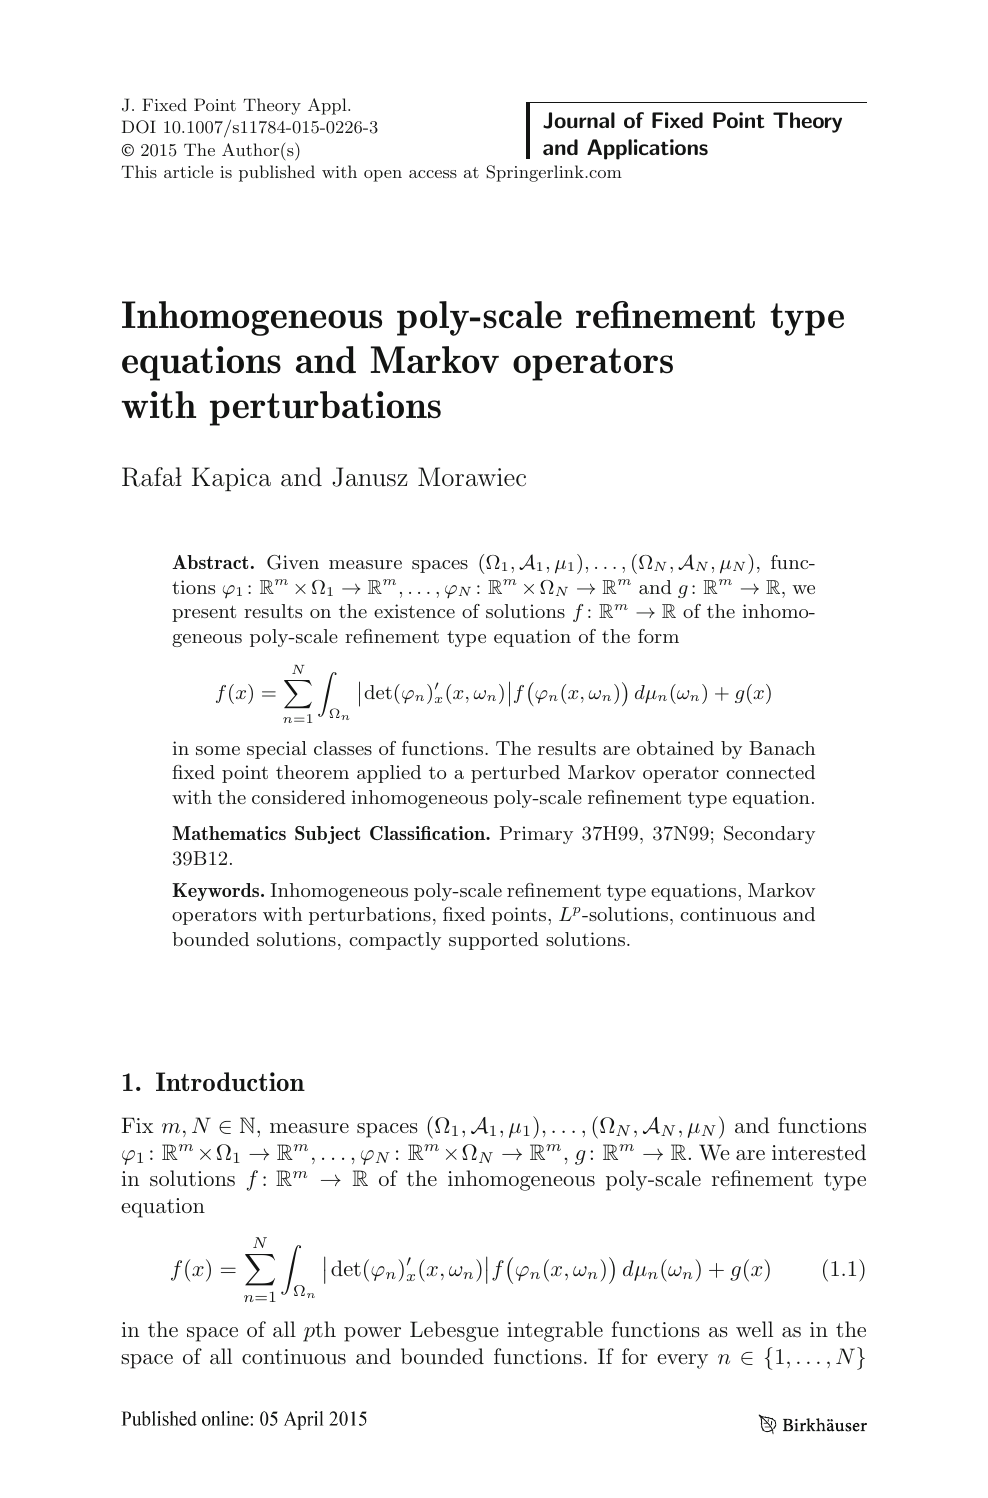 Inhomogeneous Poly Scale Refinement Type Equations And Markov Operators With Perturbations Topic Of Research Paper In Mathematics Download Scholarly Article Pdf And Read For Free On Cyberleninka Open Science Hub